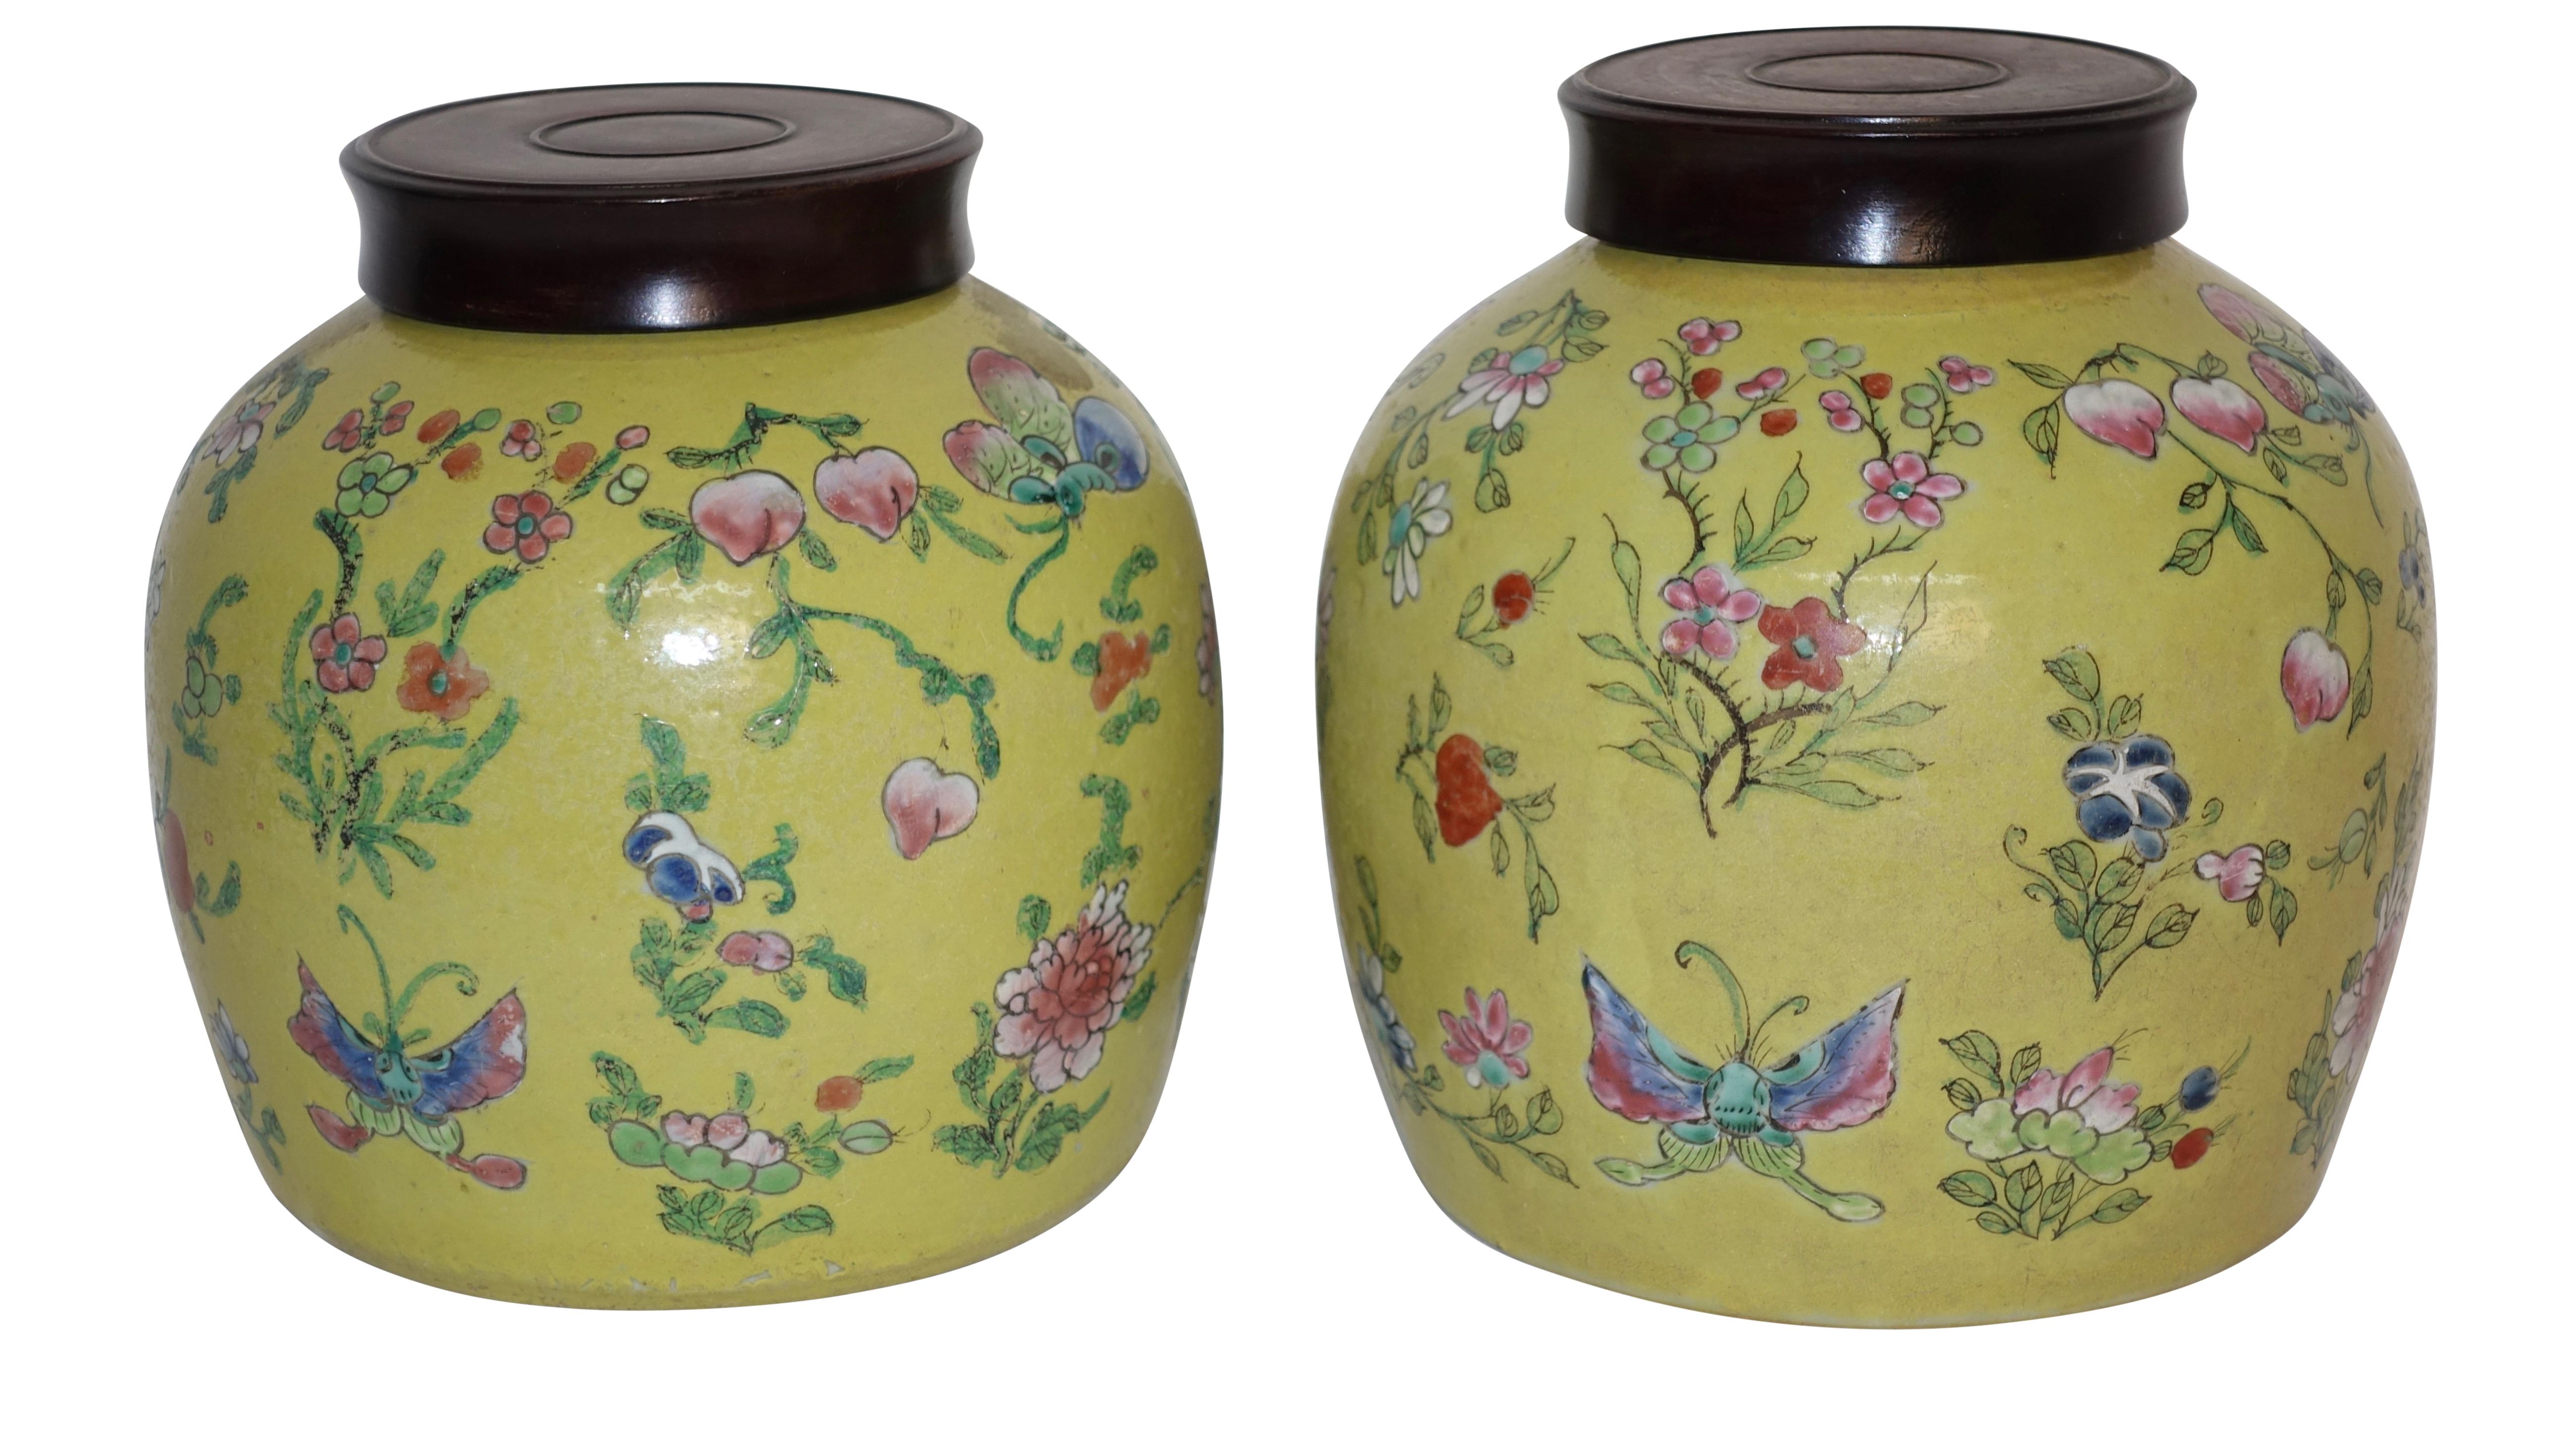 A pair of colorful Chinese jars with mustard color ground, having pink and blue flowers, pomegranates and butterflies, with hand carved wooden lids. China, Republic Period, early 20th century.